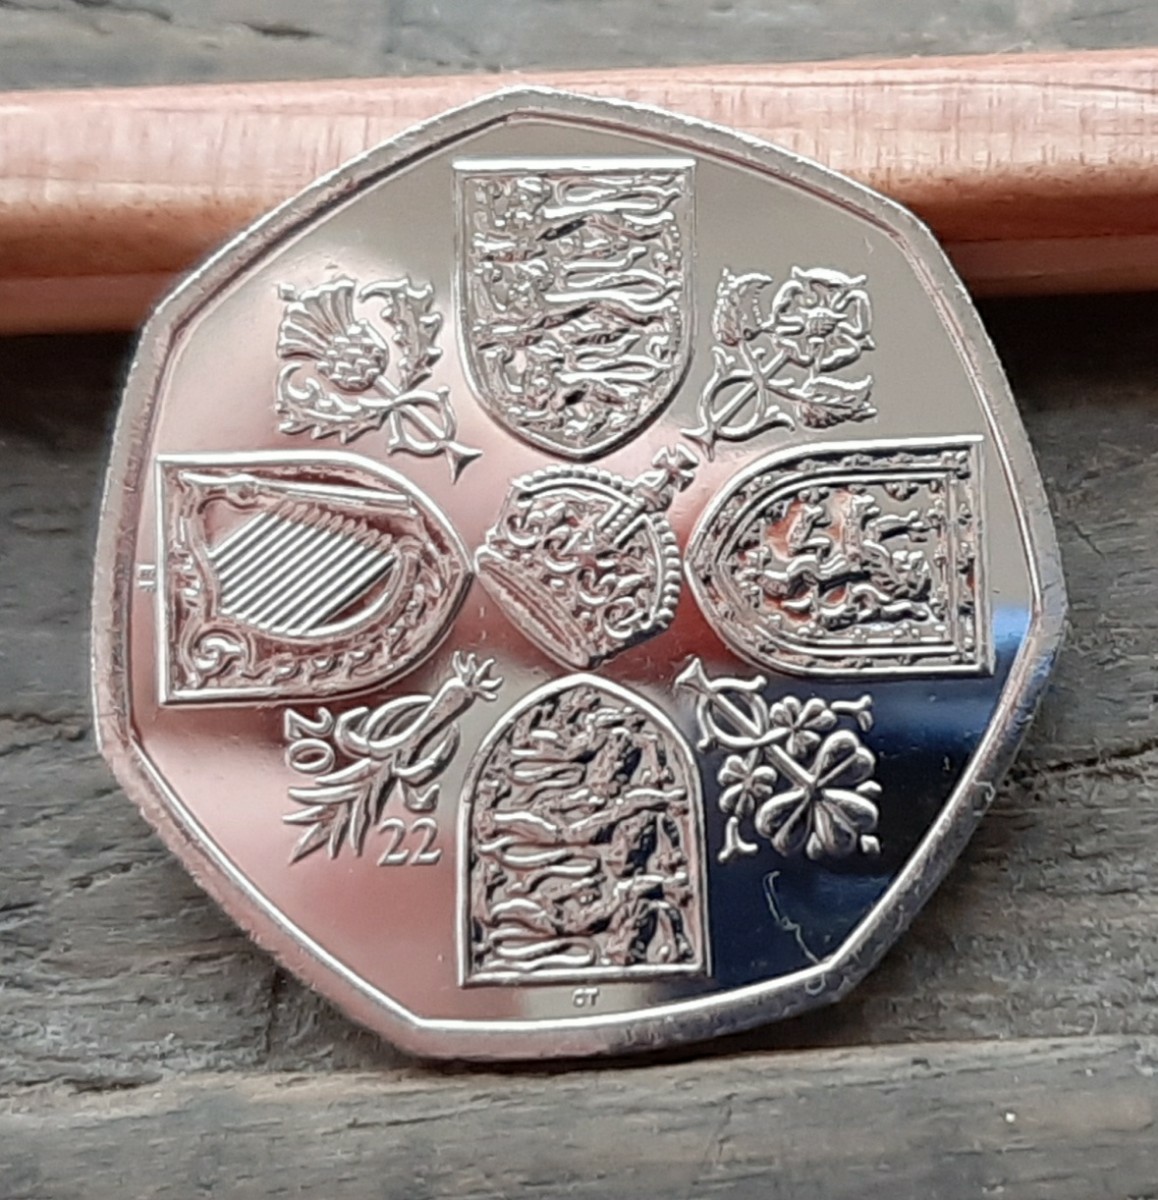 Charles王 チャールズ3世 50ペンス 新デザインイギリス コイン英国2022年8g 27mm One uncirculated 50 pence coin from The Royal Mintの画像4